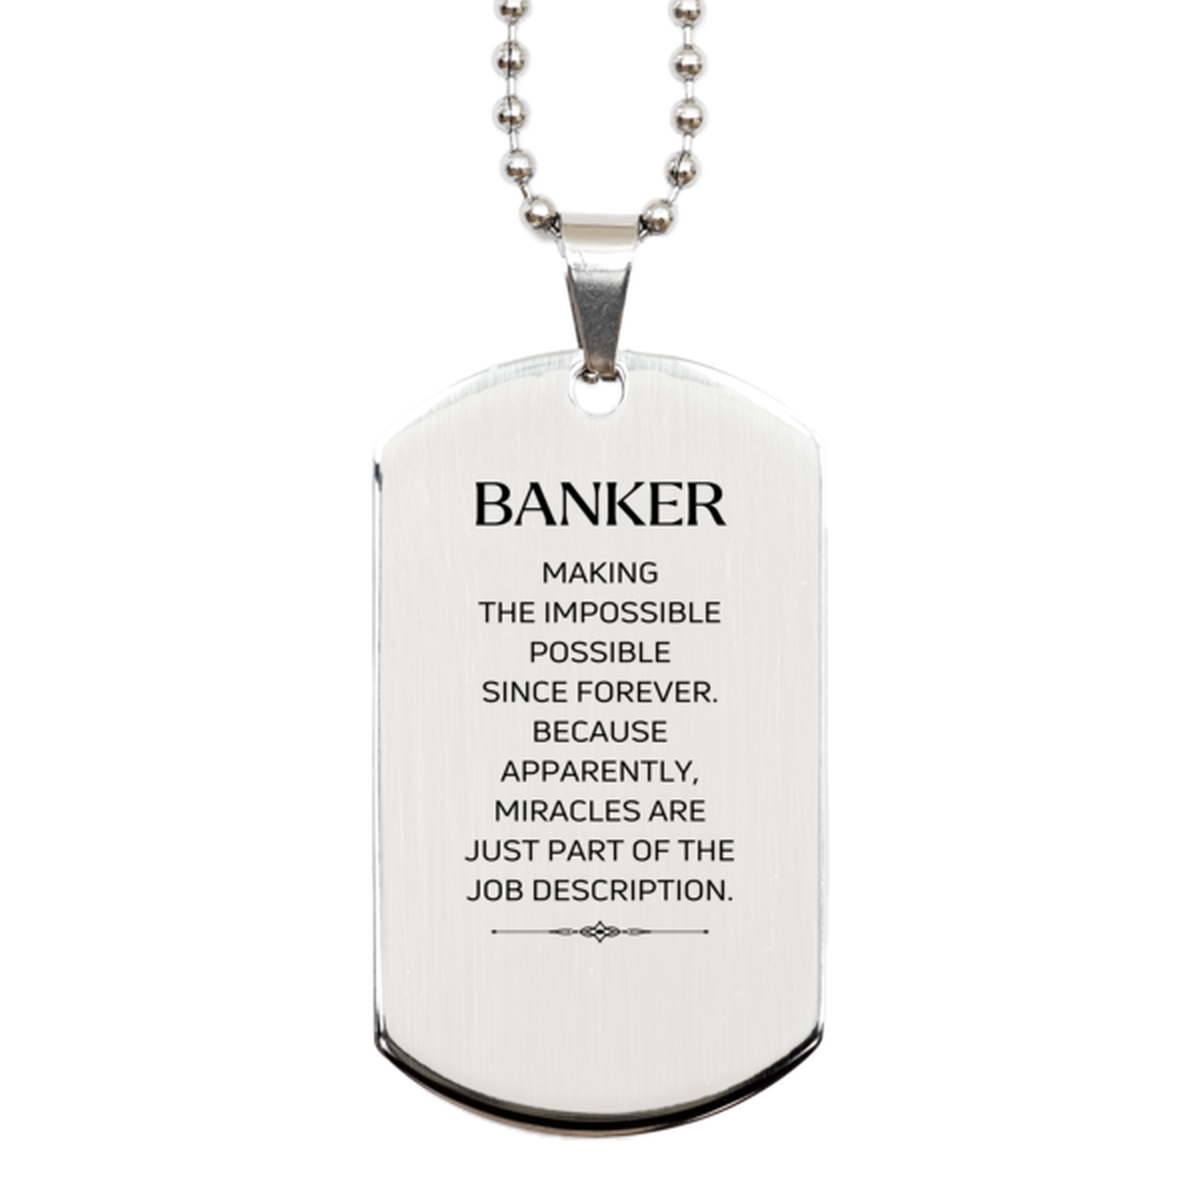 Funny Banker Gifts, Miracles are just part of the job description, Inspirational Birthday Silver Dog Tag For Banker, Men, Women, Coworkers, Friends, Boss